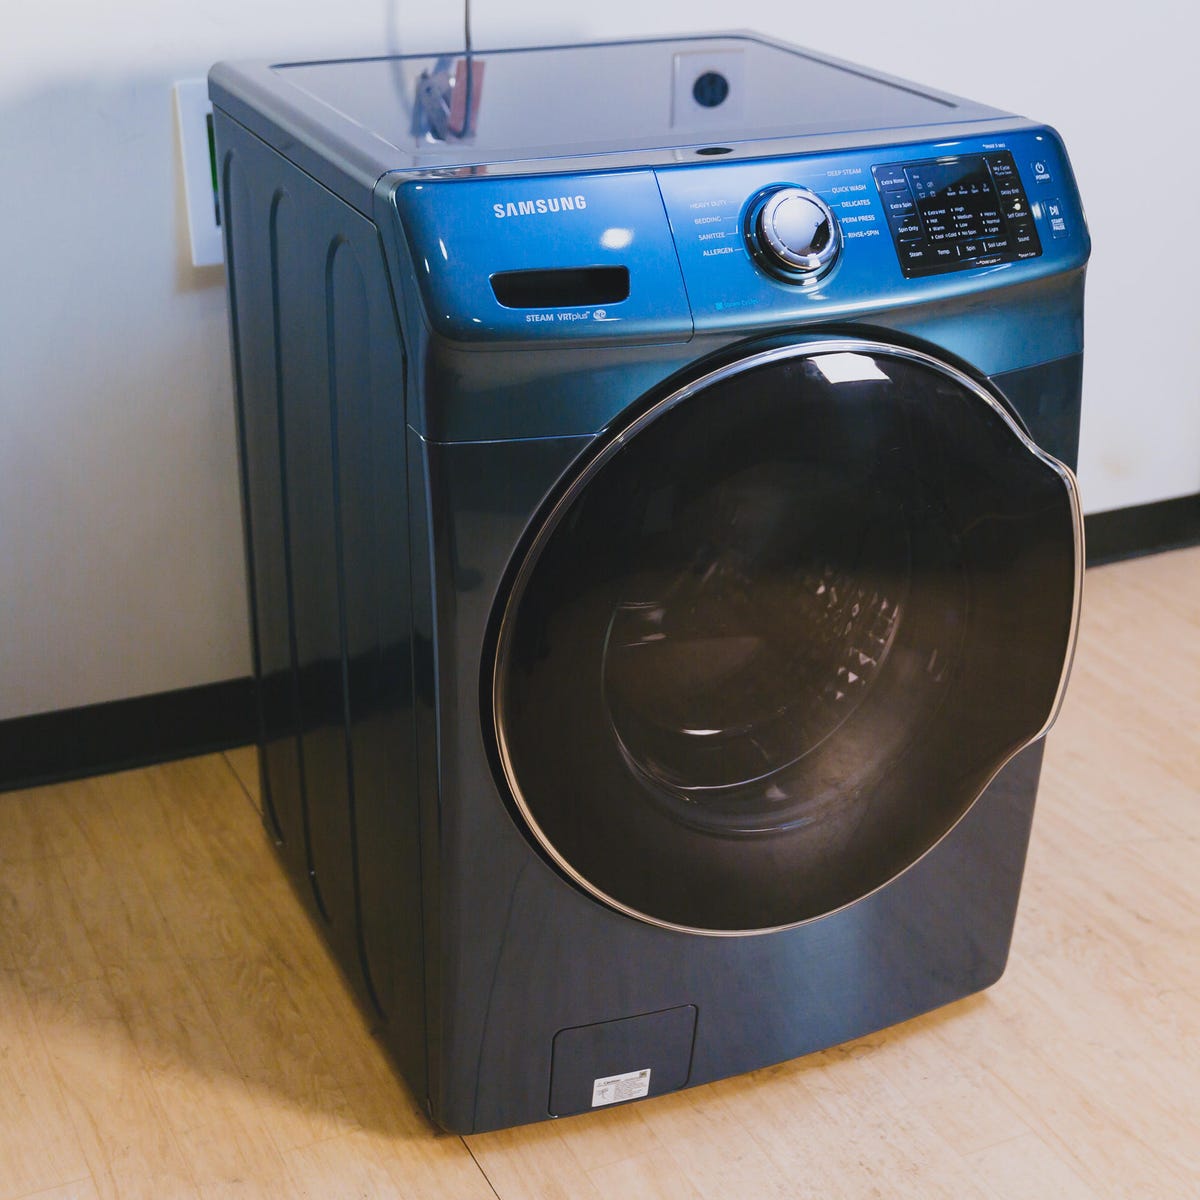 Samsung's washing machine makes laundry day less stressful - CNET